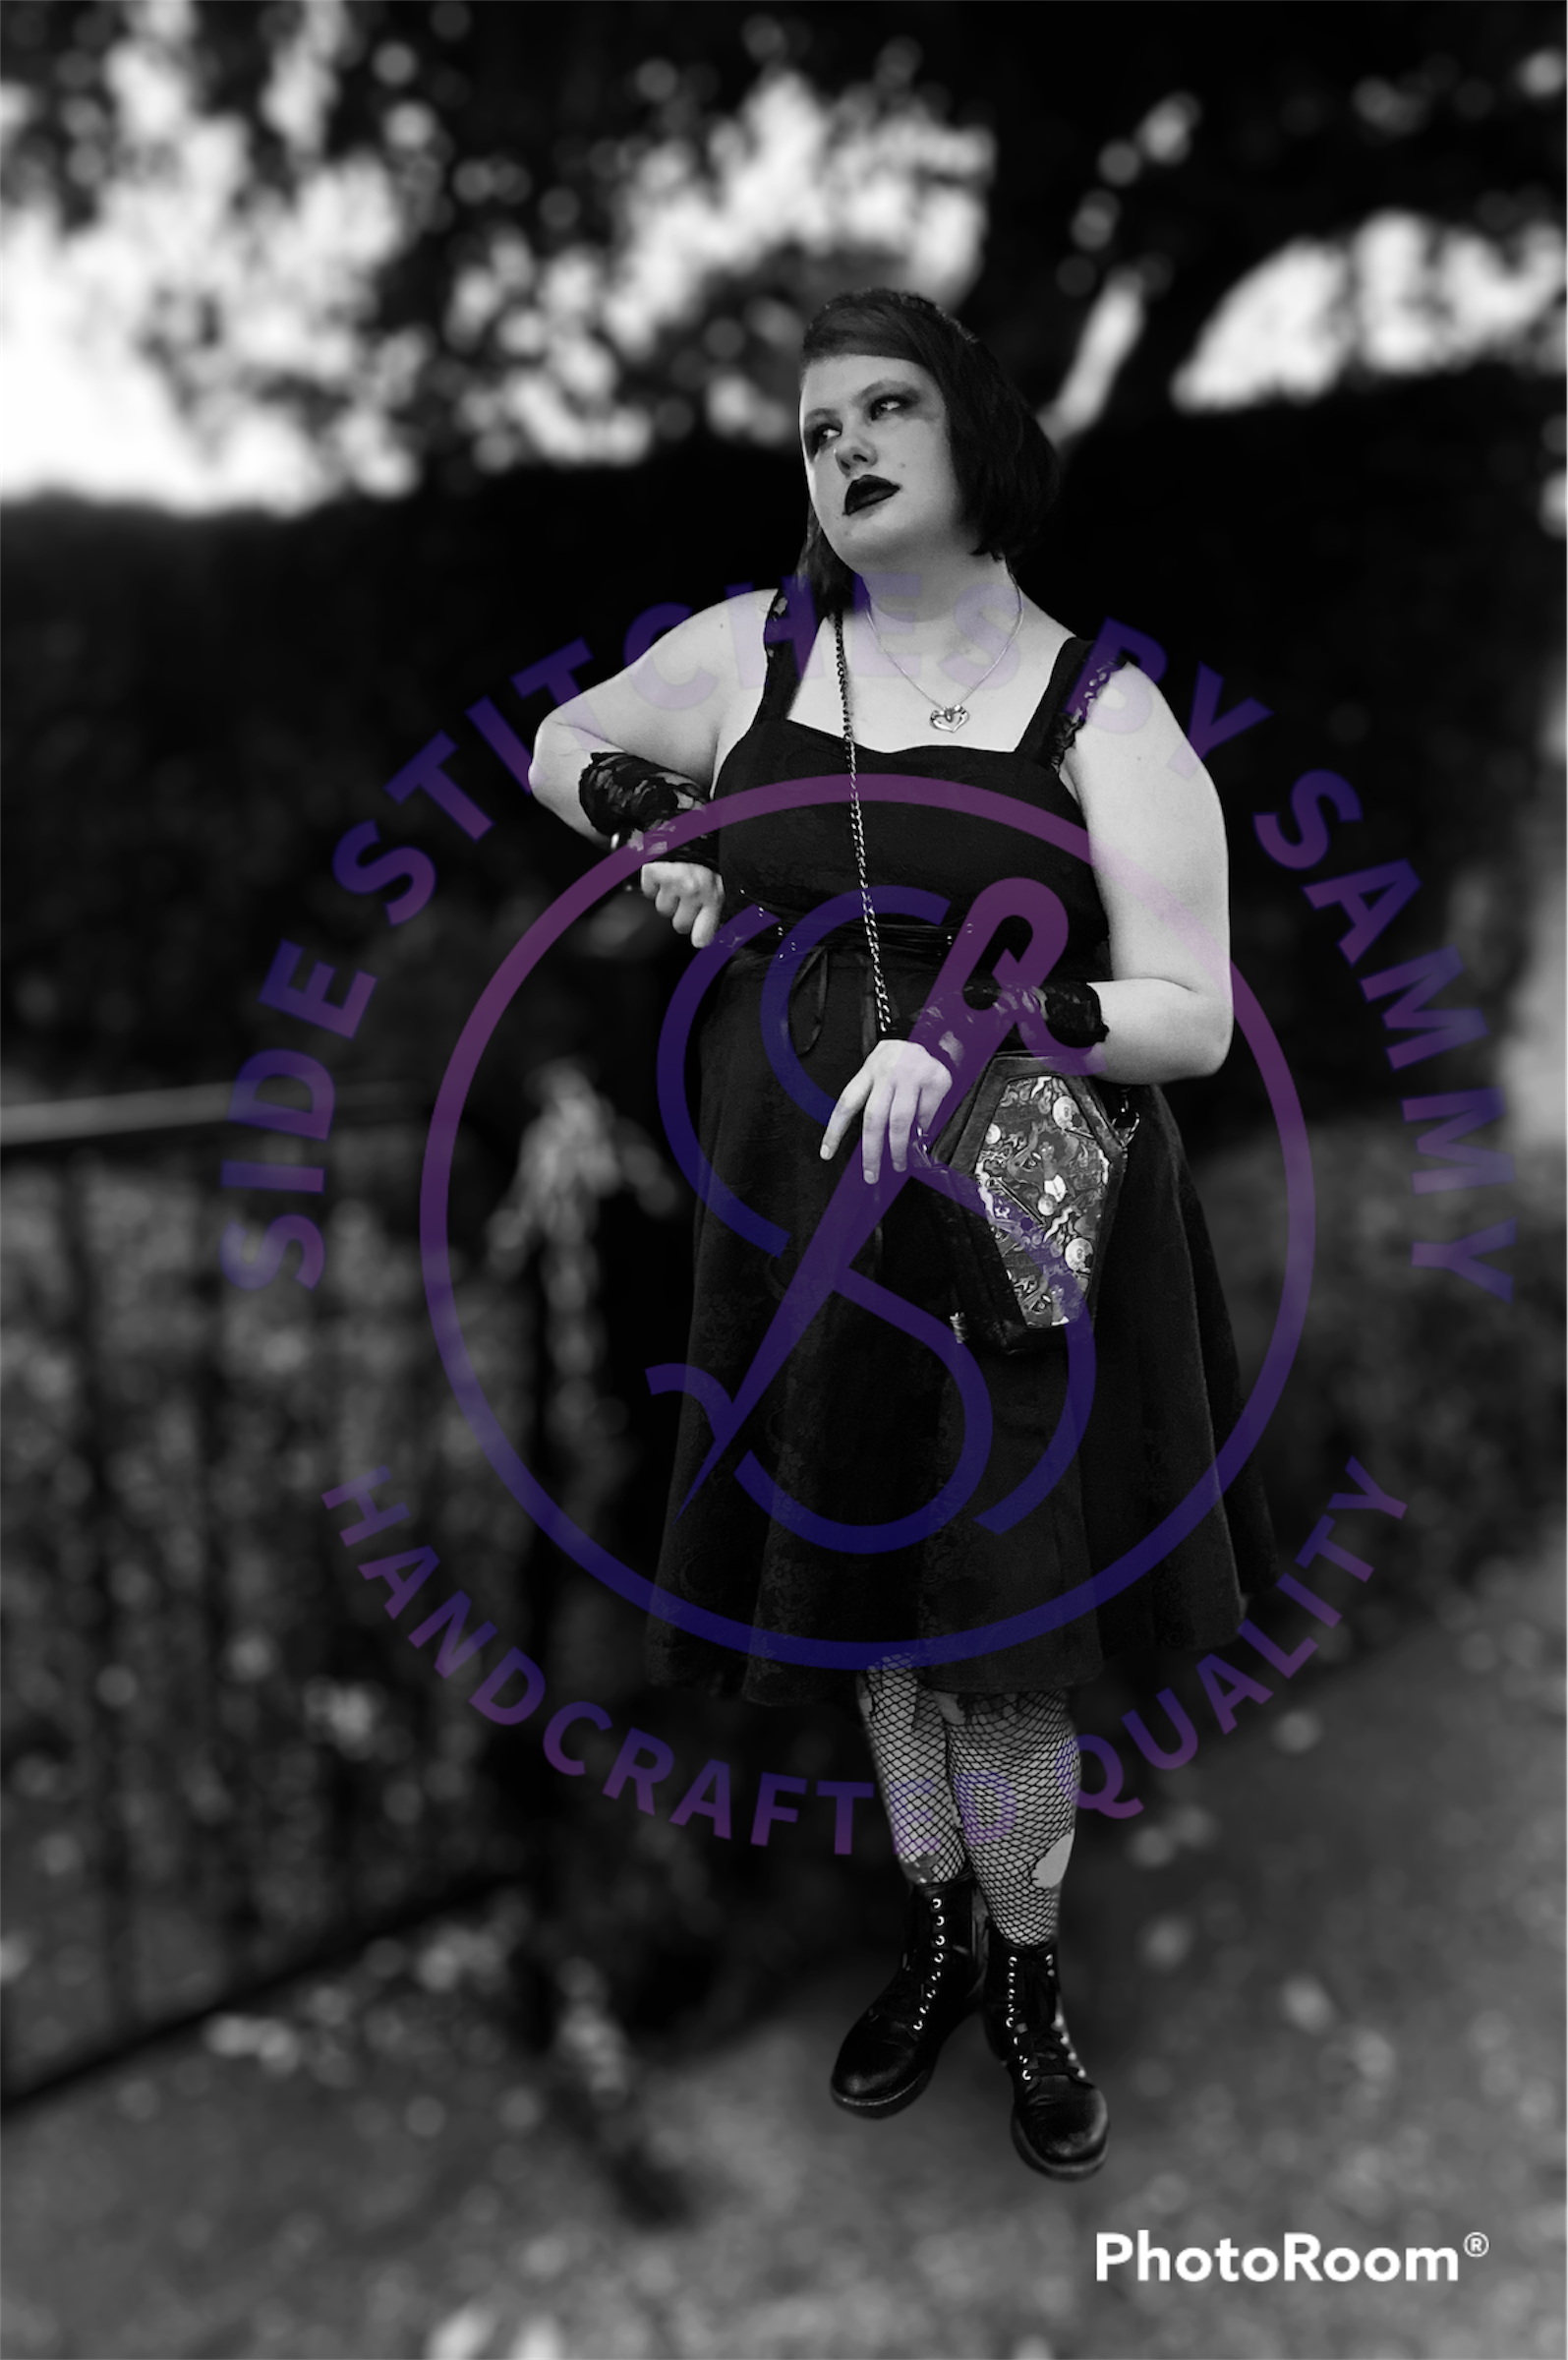 Coffin Handbag Sewing Pattern – Seamingly Wicked